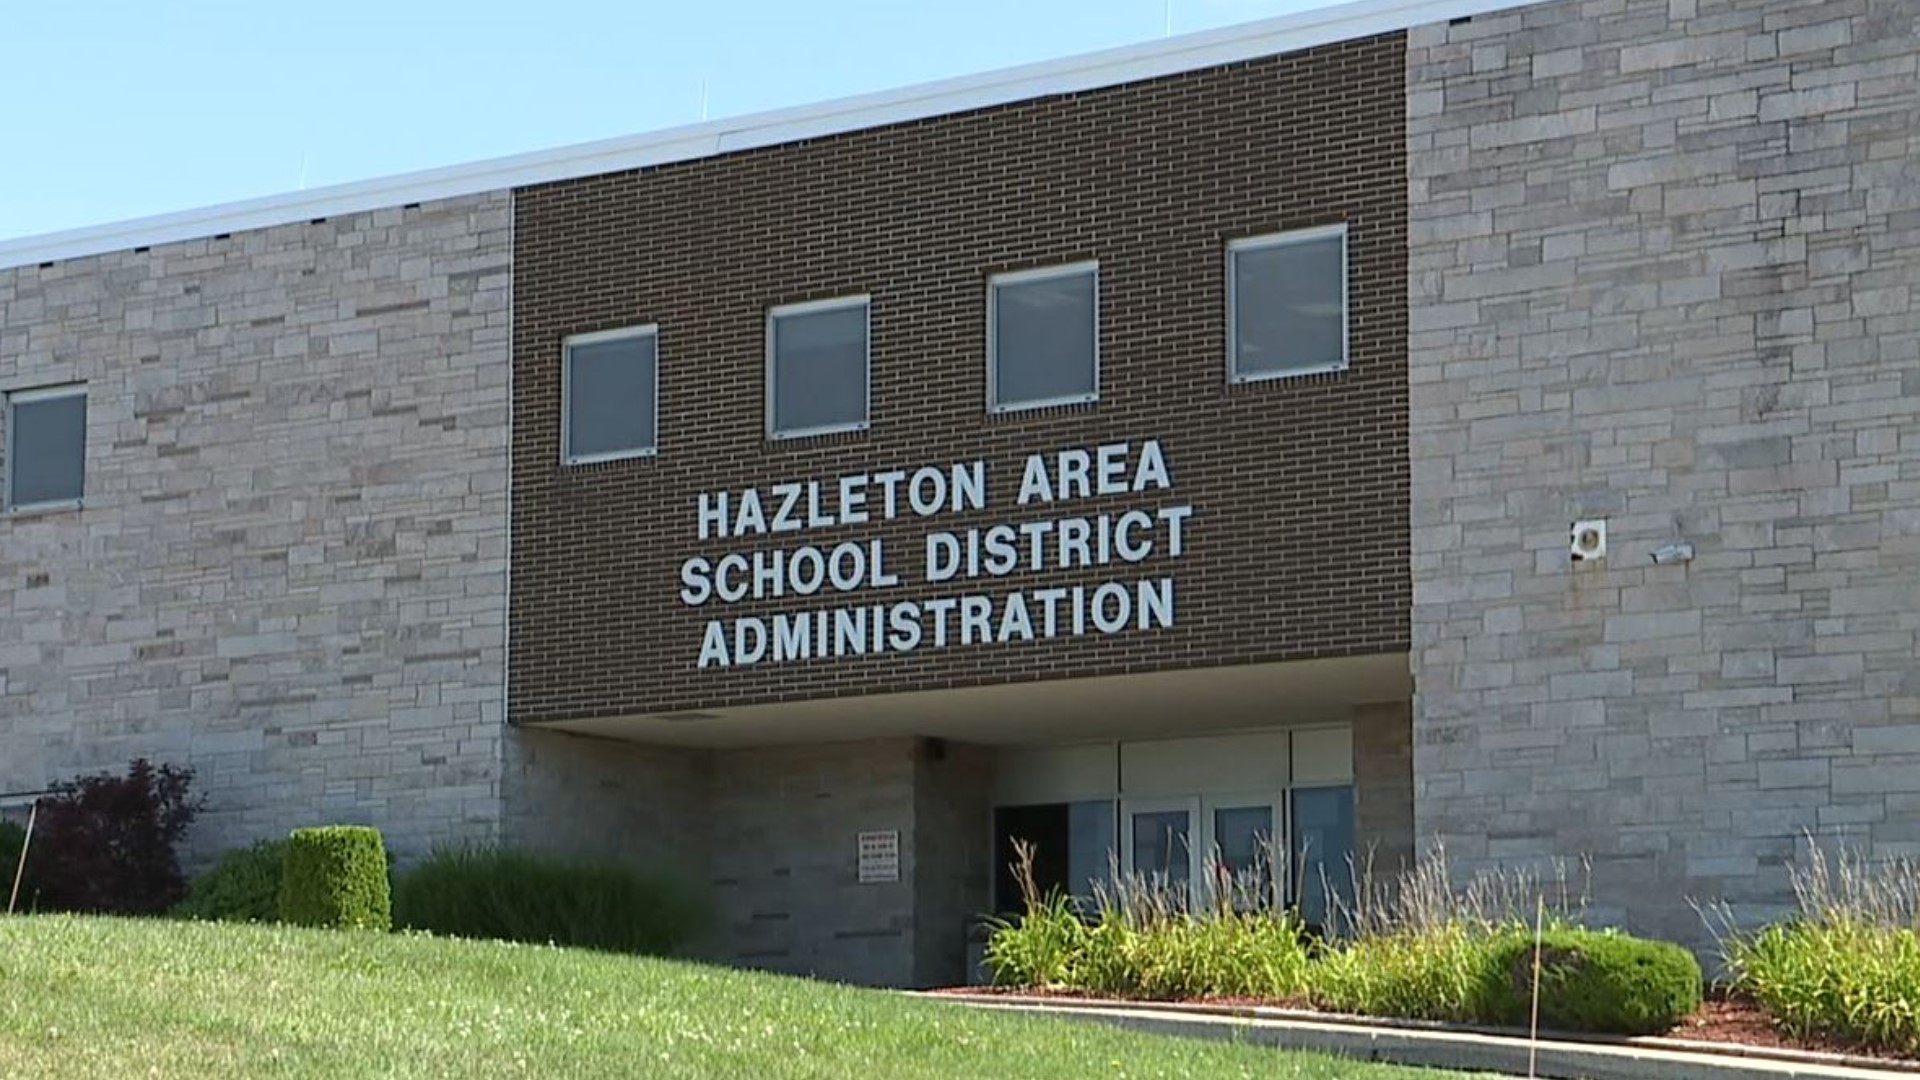 A new program aimed at getting students interested in health careers is underway in the Hazleton area.